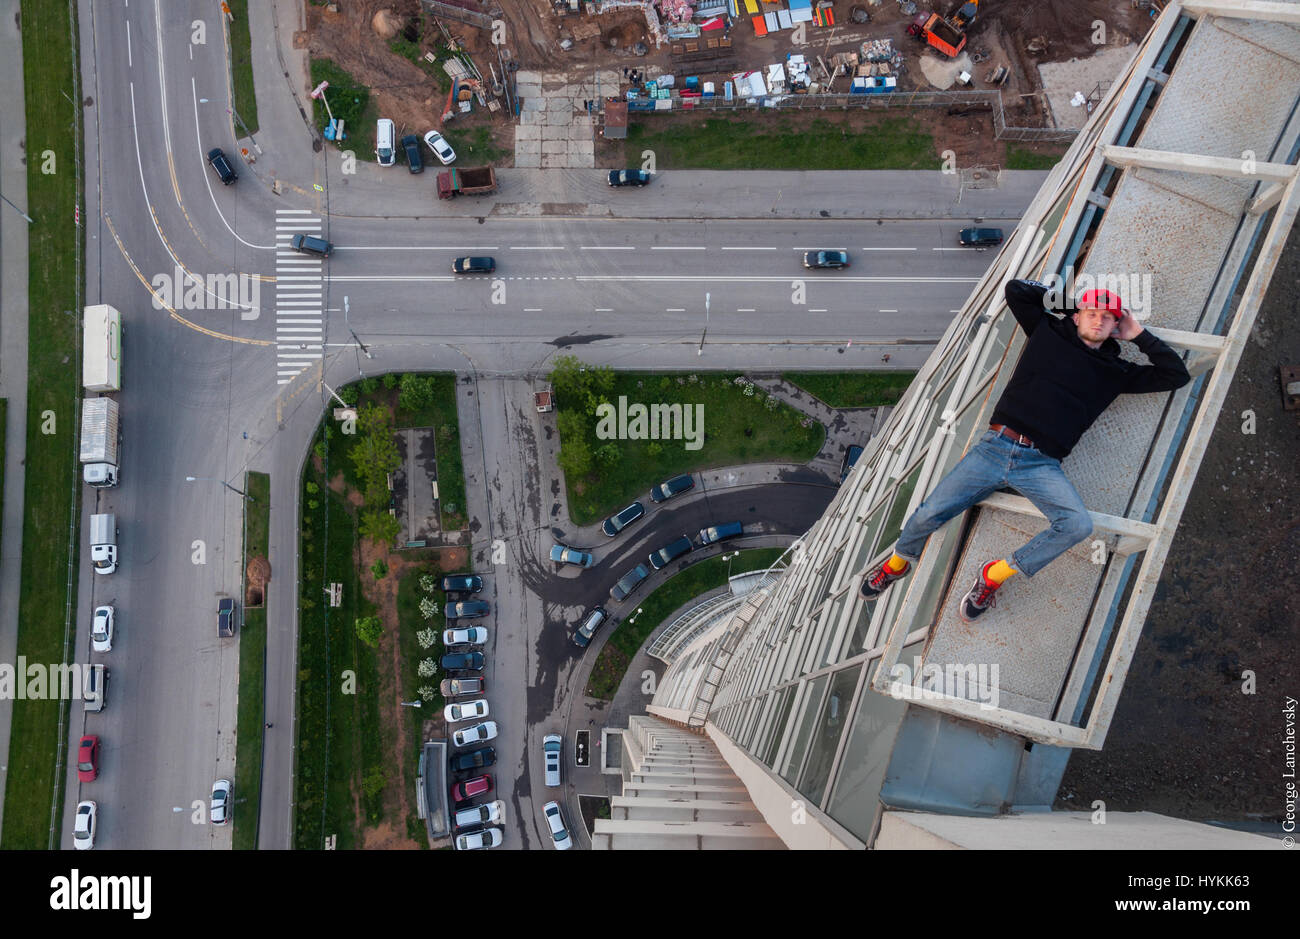 Moscow. VERTIGO inducing pictures from the top of a 155-foot-high crane have been captured by a photographer in bid to overcome his fear of heights. The amazing aerial images show the photographer and his friends throw caution to the wind as they precariously perch high above the cities with no safety equipment. Other shots capture the adventurous bunch in the middle of climbs up cranes and beautiful women posing on the edge of roof tops. The extreme photos were taken by Moscow photographer and acrophobic George Lanchevsky (24) in cities around the world including Moscow, Galich and Hong Kong. Stock Photo